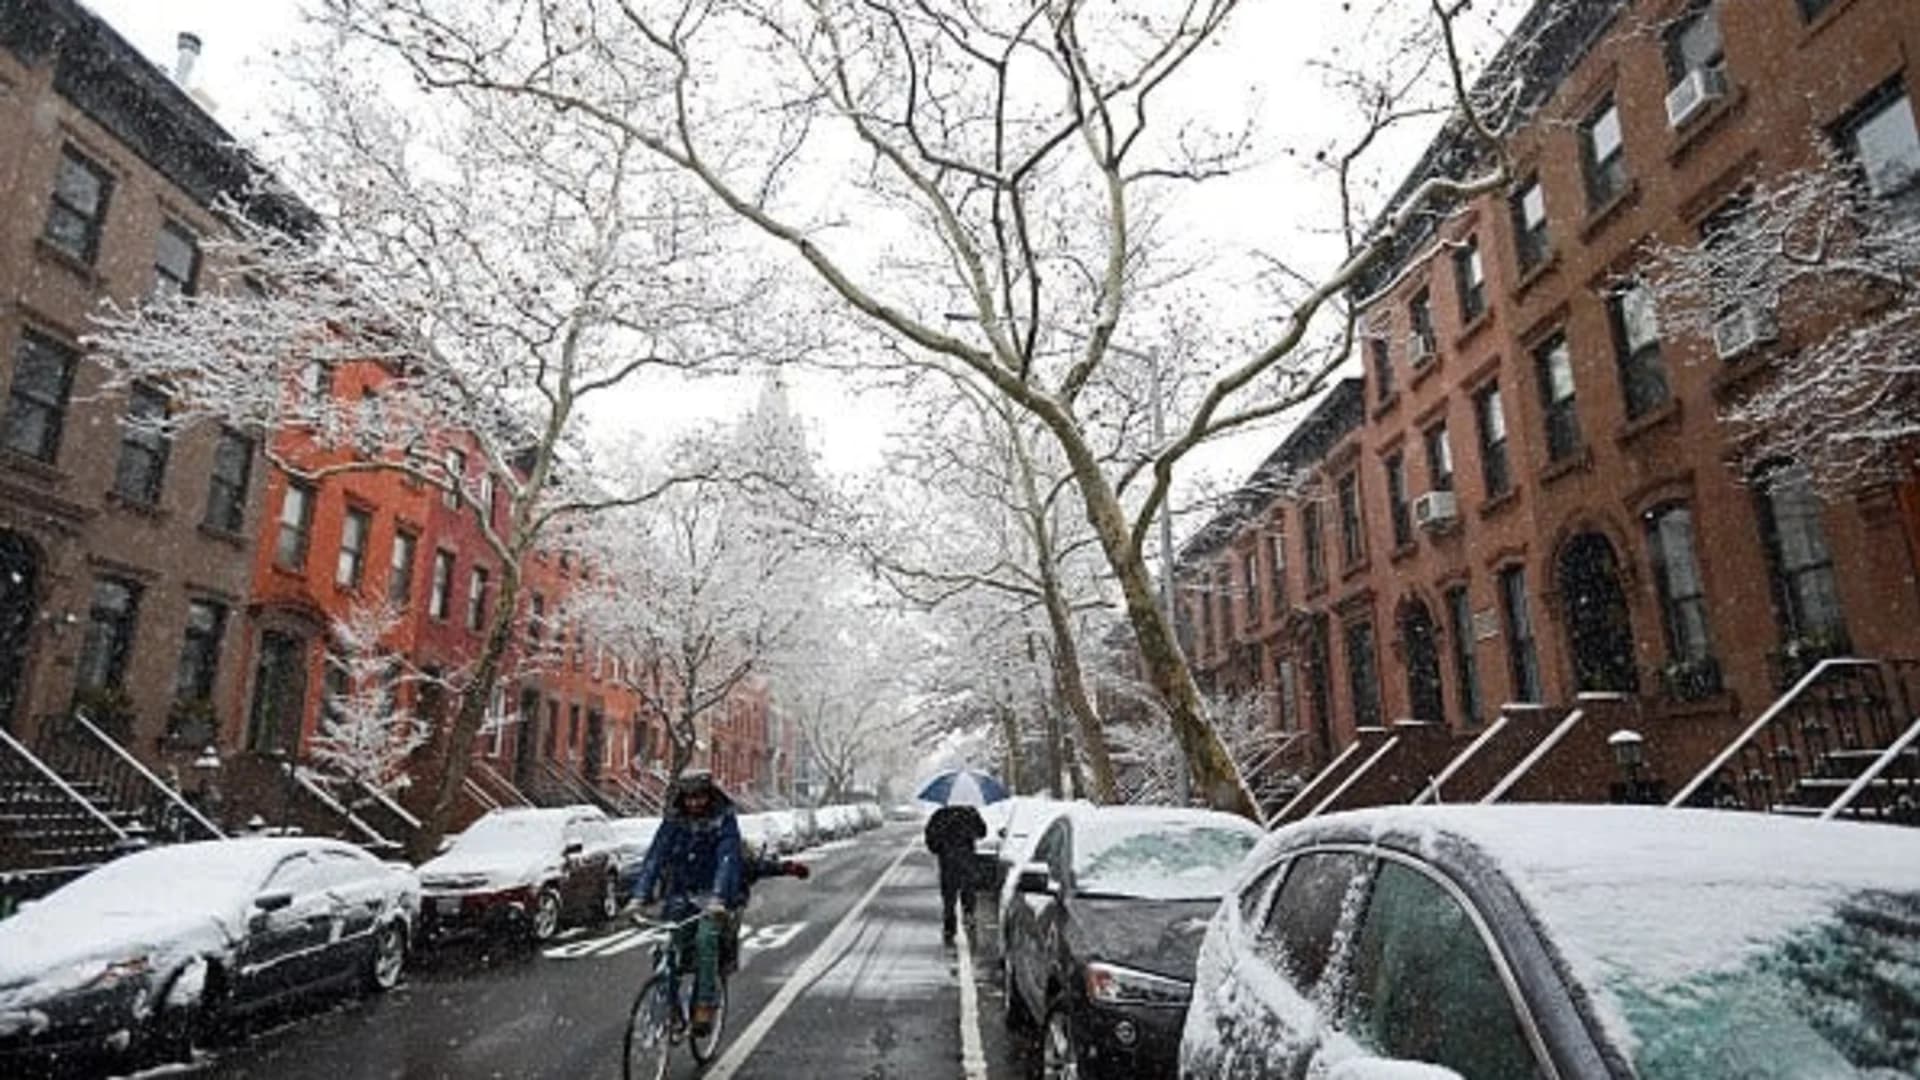 Snow expected across the Bronx this weekend